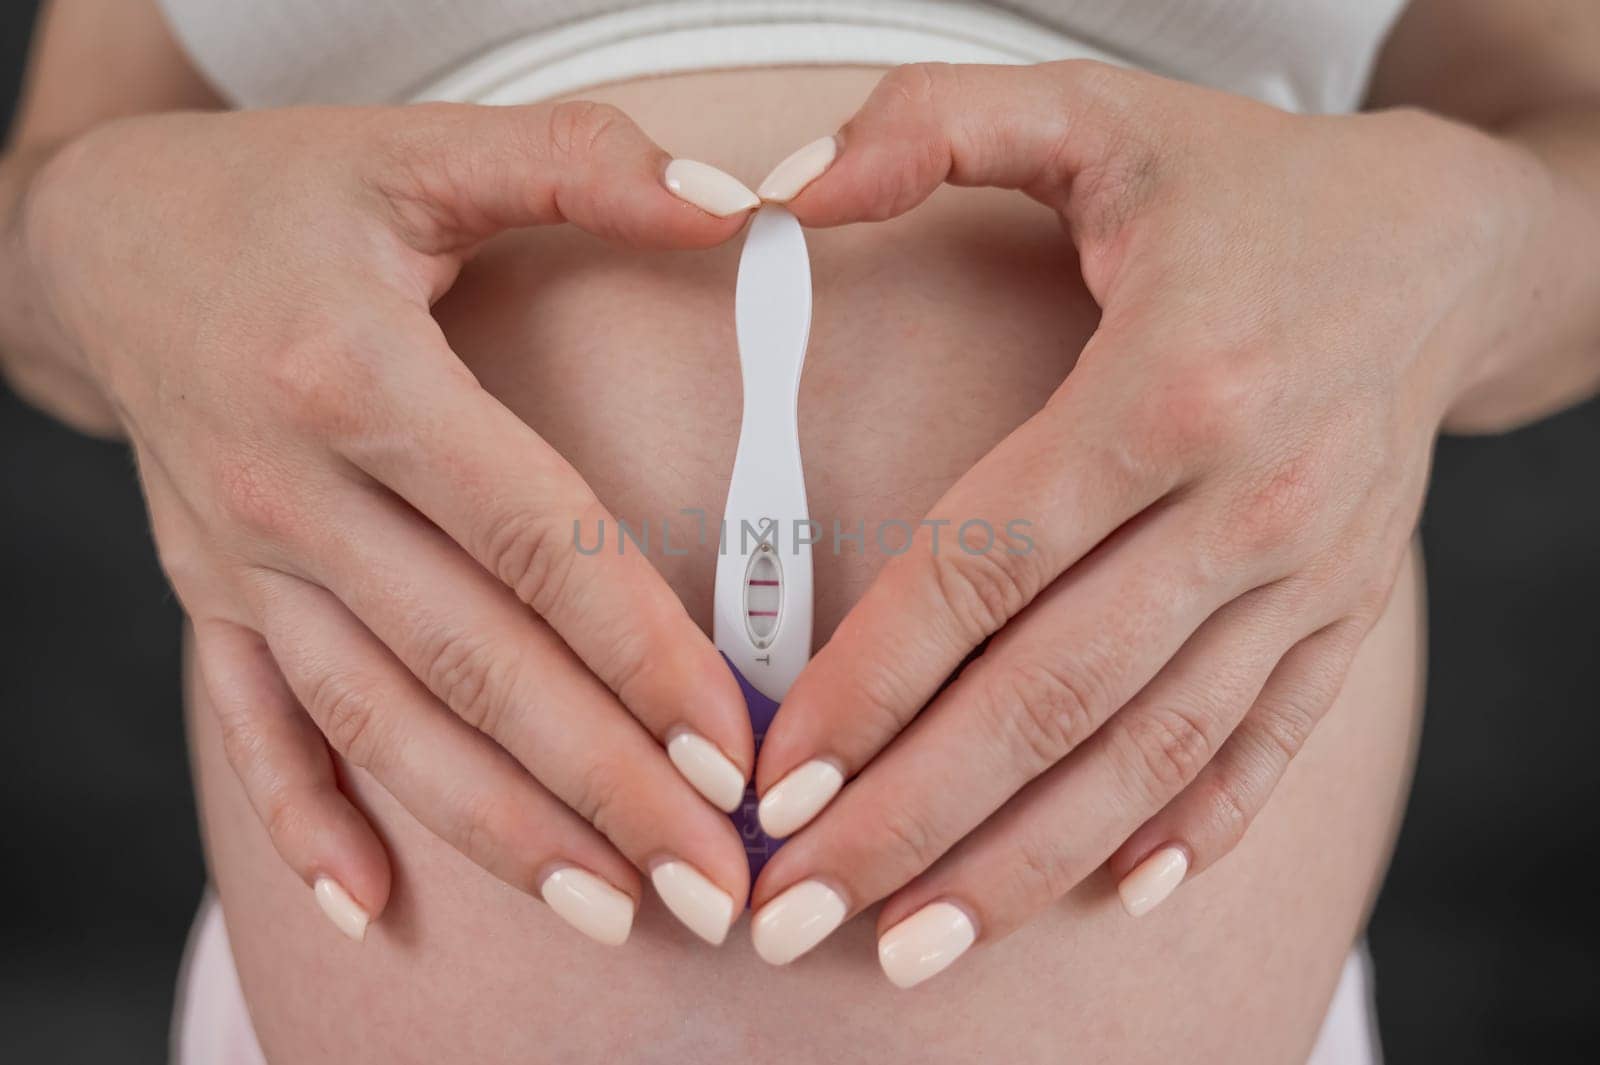 Caucasian woman holding a positive express pregnancy test against the background of her tummy. by mrwed54